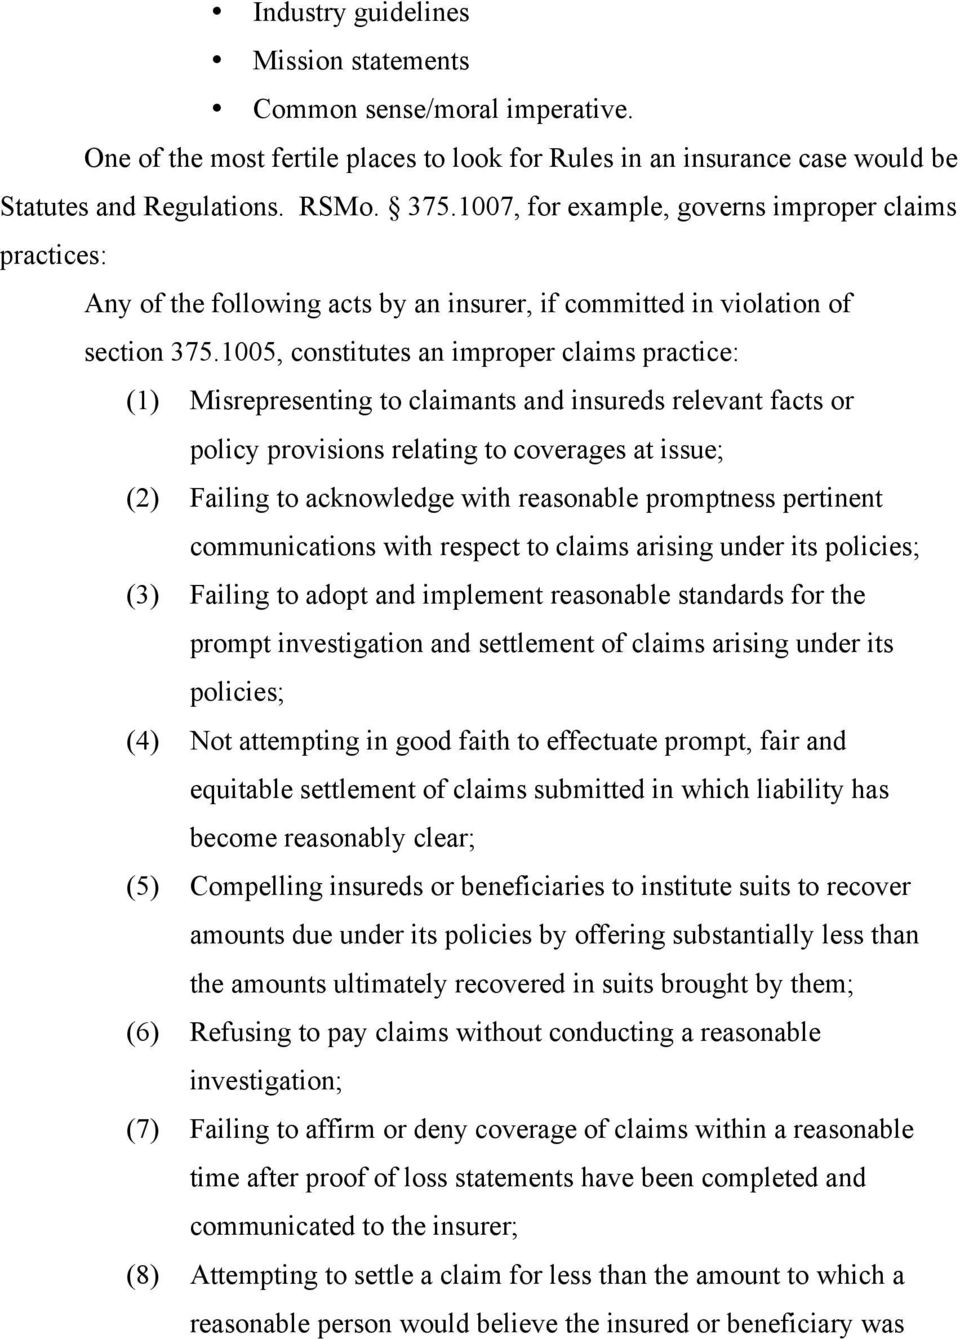 1005, constitutes an improper claims practice: (1) Misrepresenting to claimants and insureds relevant facts or policy provisions relating to coverages at issue; (2) Failing to acknowledge with